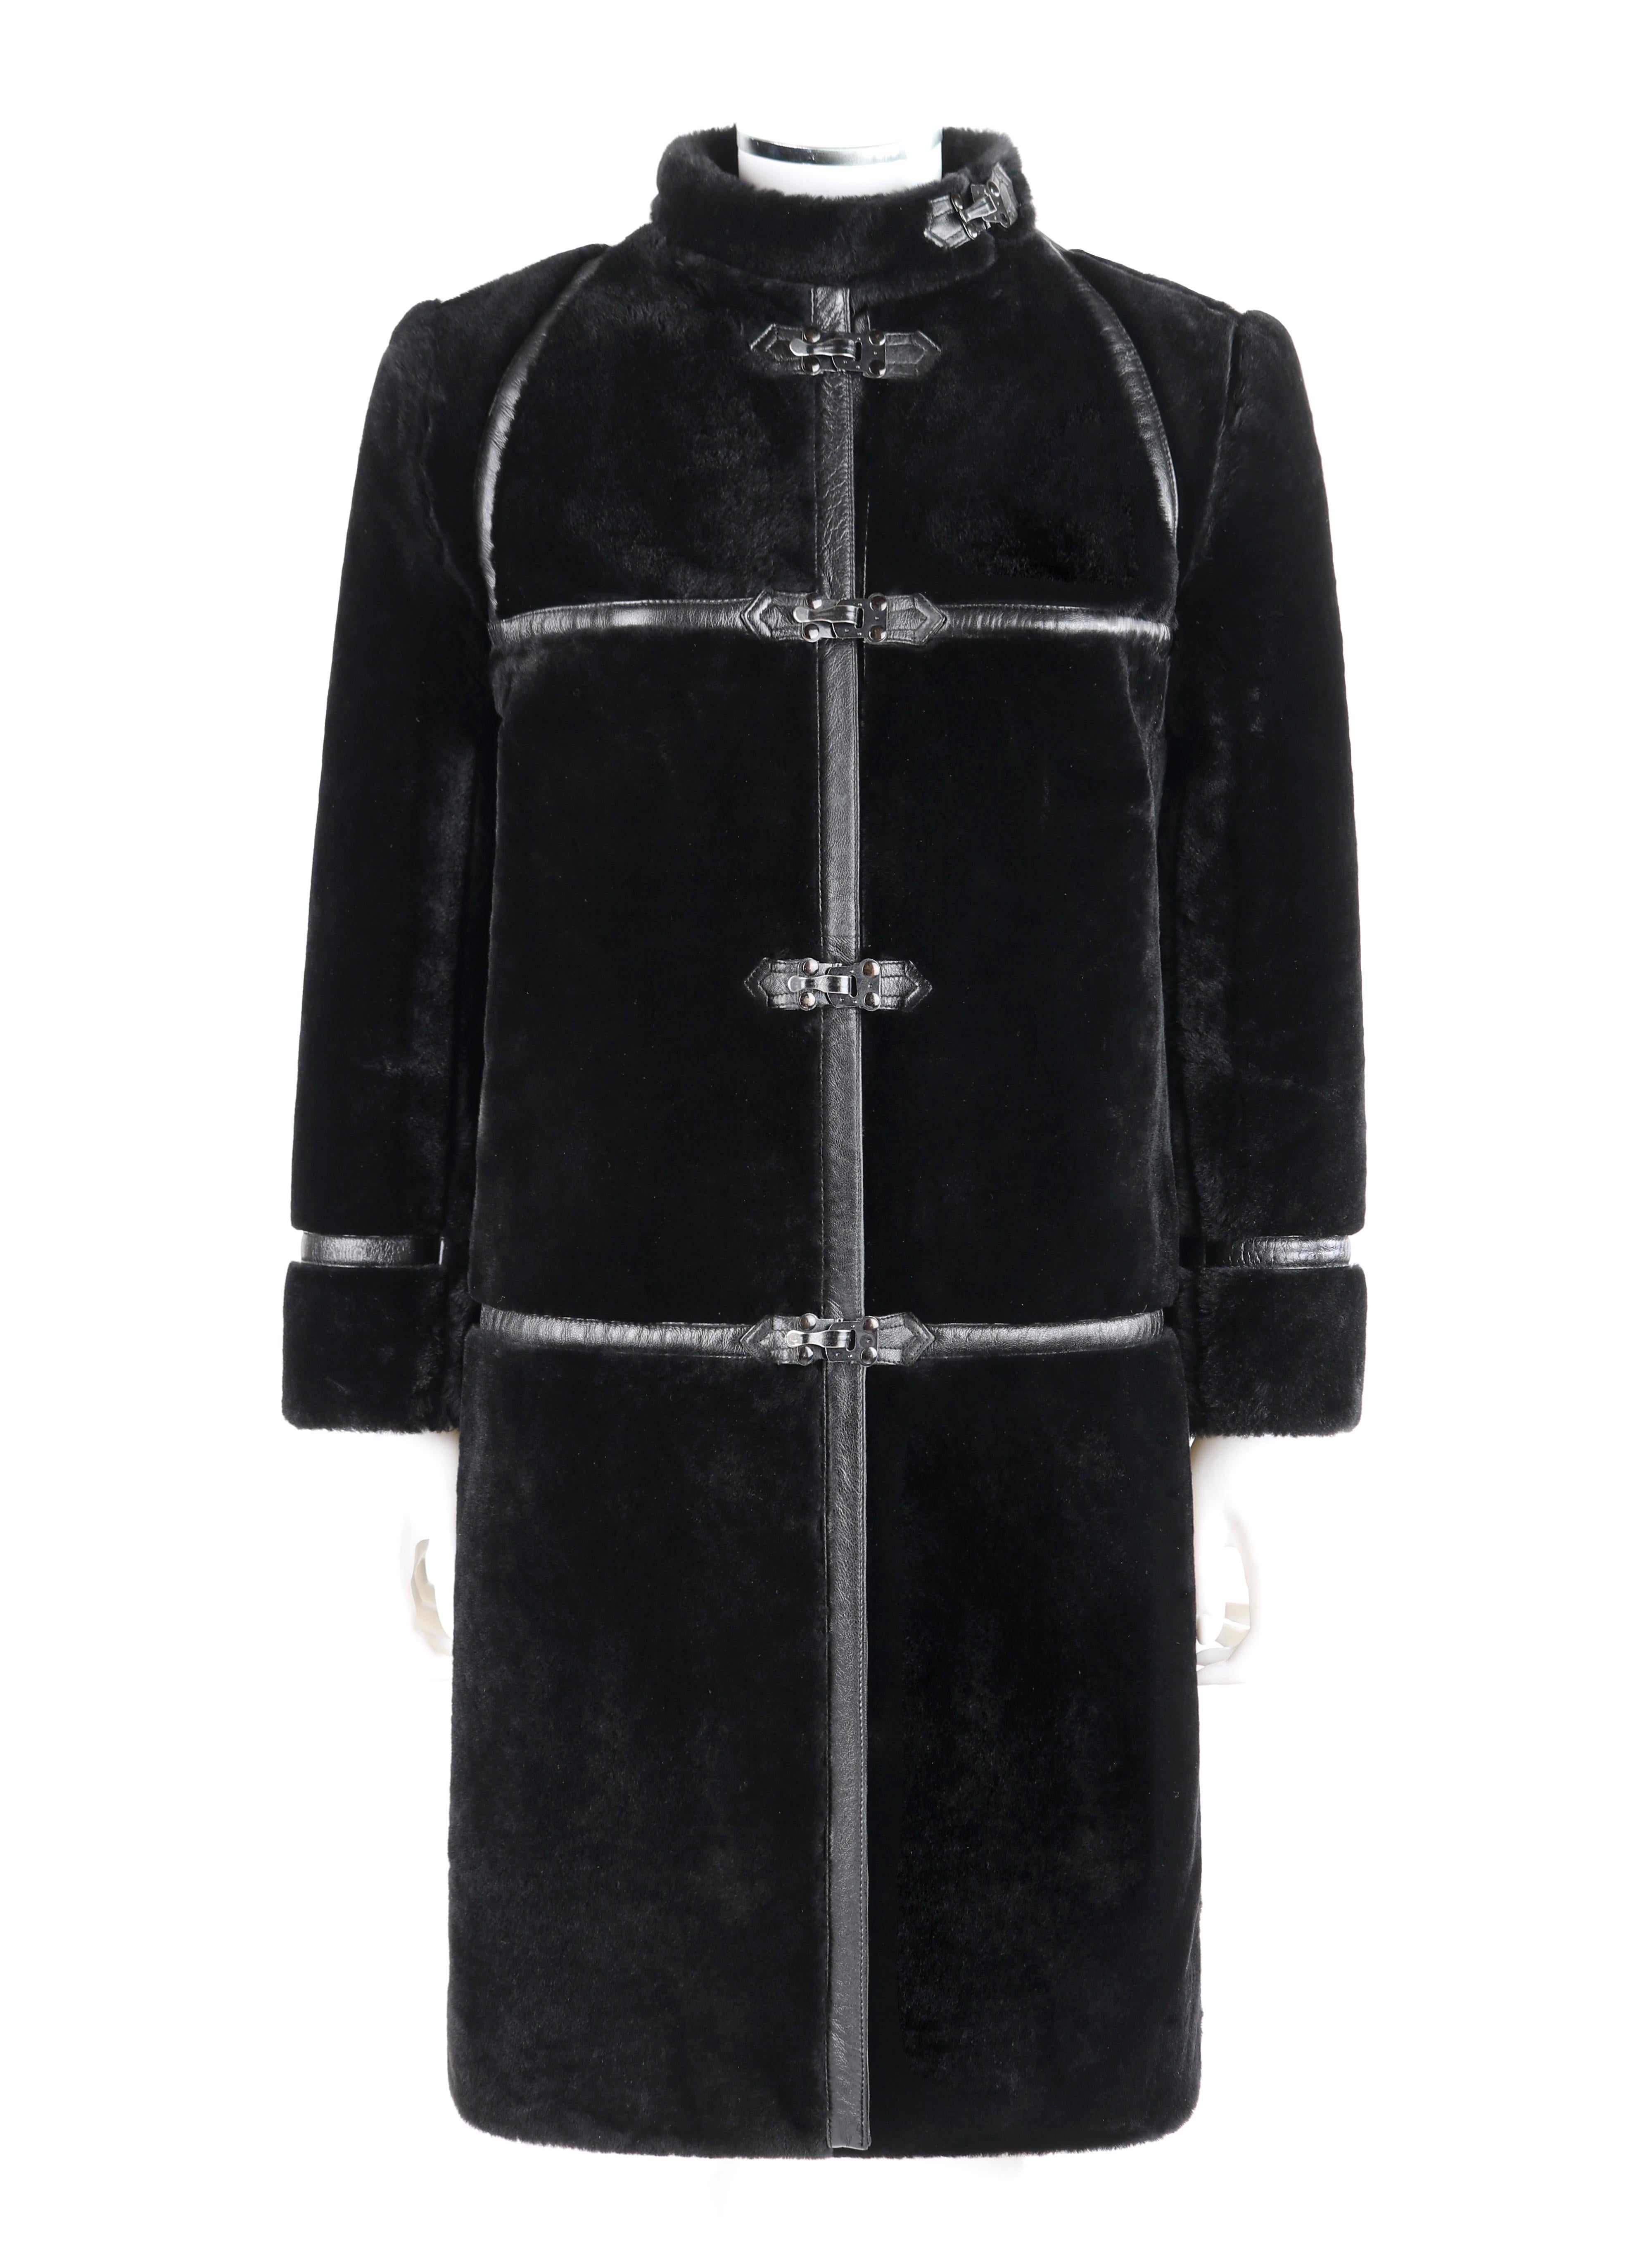 ALBERT ALFUS c.1960’s Black Shearling Fur Leather Trim Buckle Up Overcoat 

Circa: 1960’s
Label(s): Albert Alfus New York, Coplin’s Milwaukee, ILGWU Union tag
Designer: Albert Alfus
Style: Overcoat
Color(s): Black
Lined: Yes
Unmarked Fabric Content